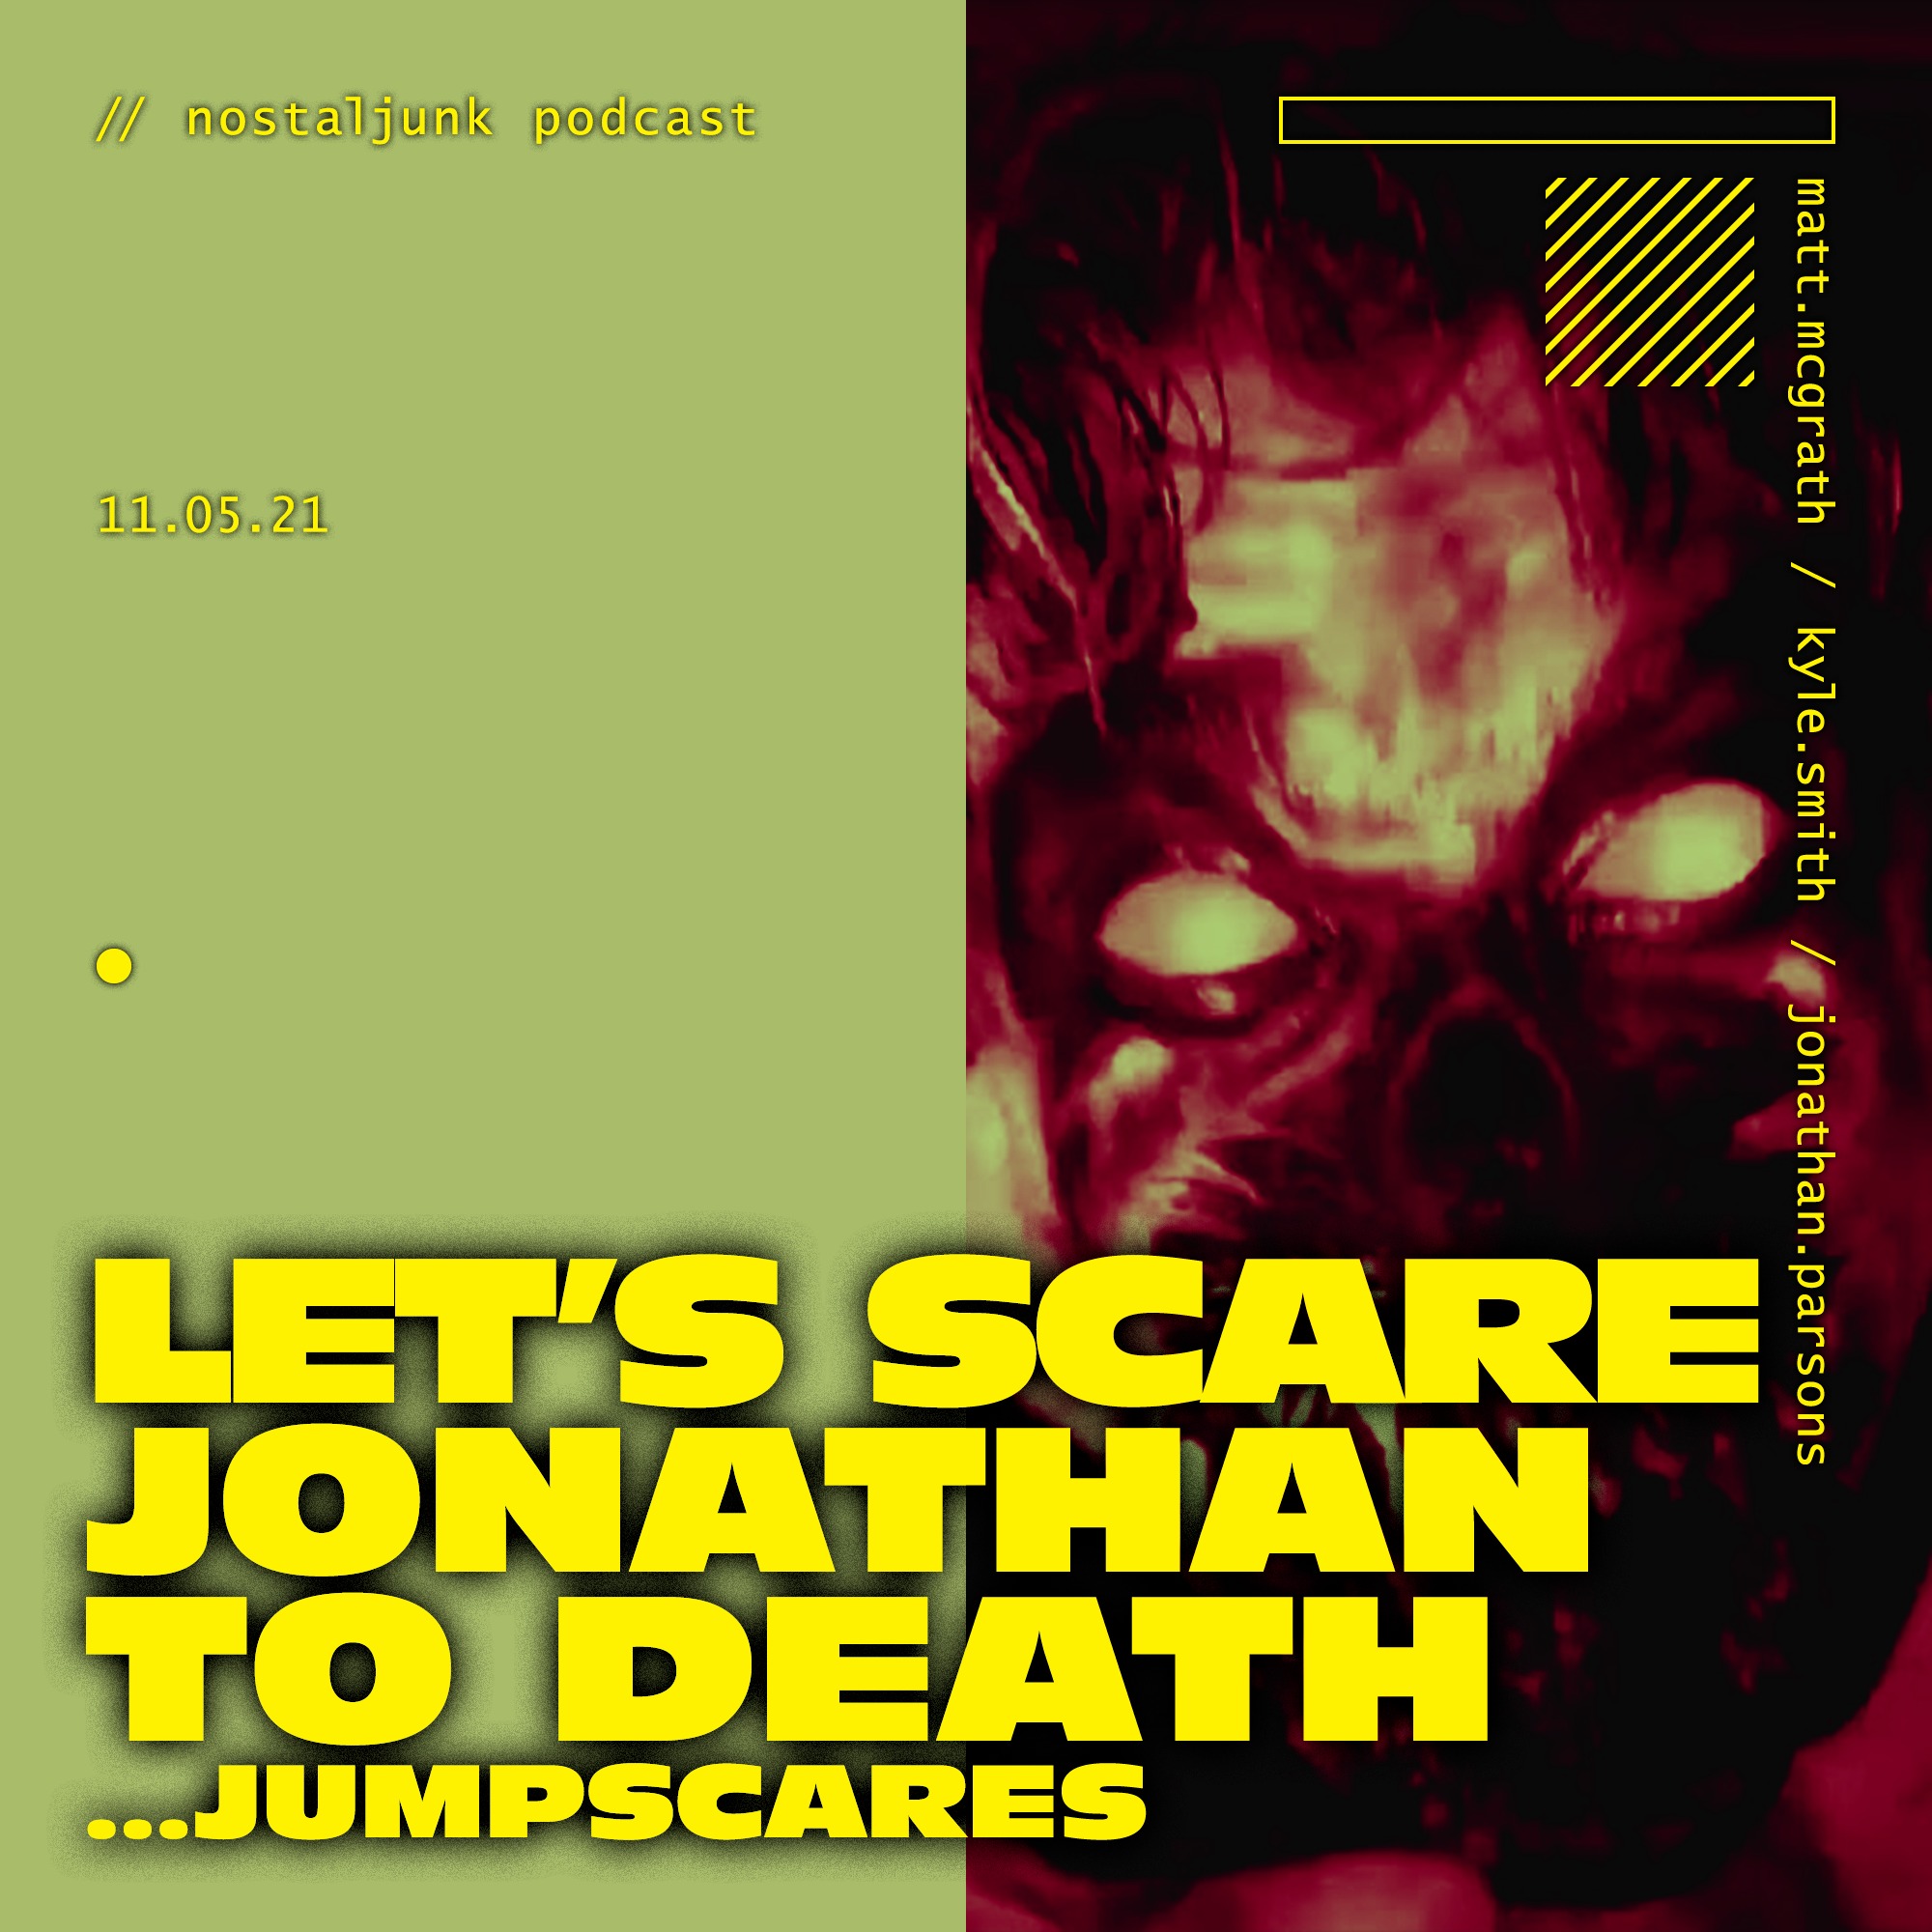 Let's Scare Jonathan To Death... JUMPSCARES! Image